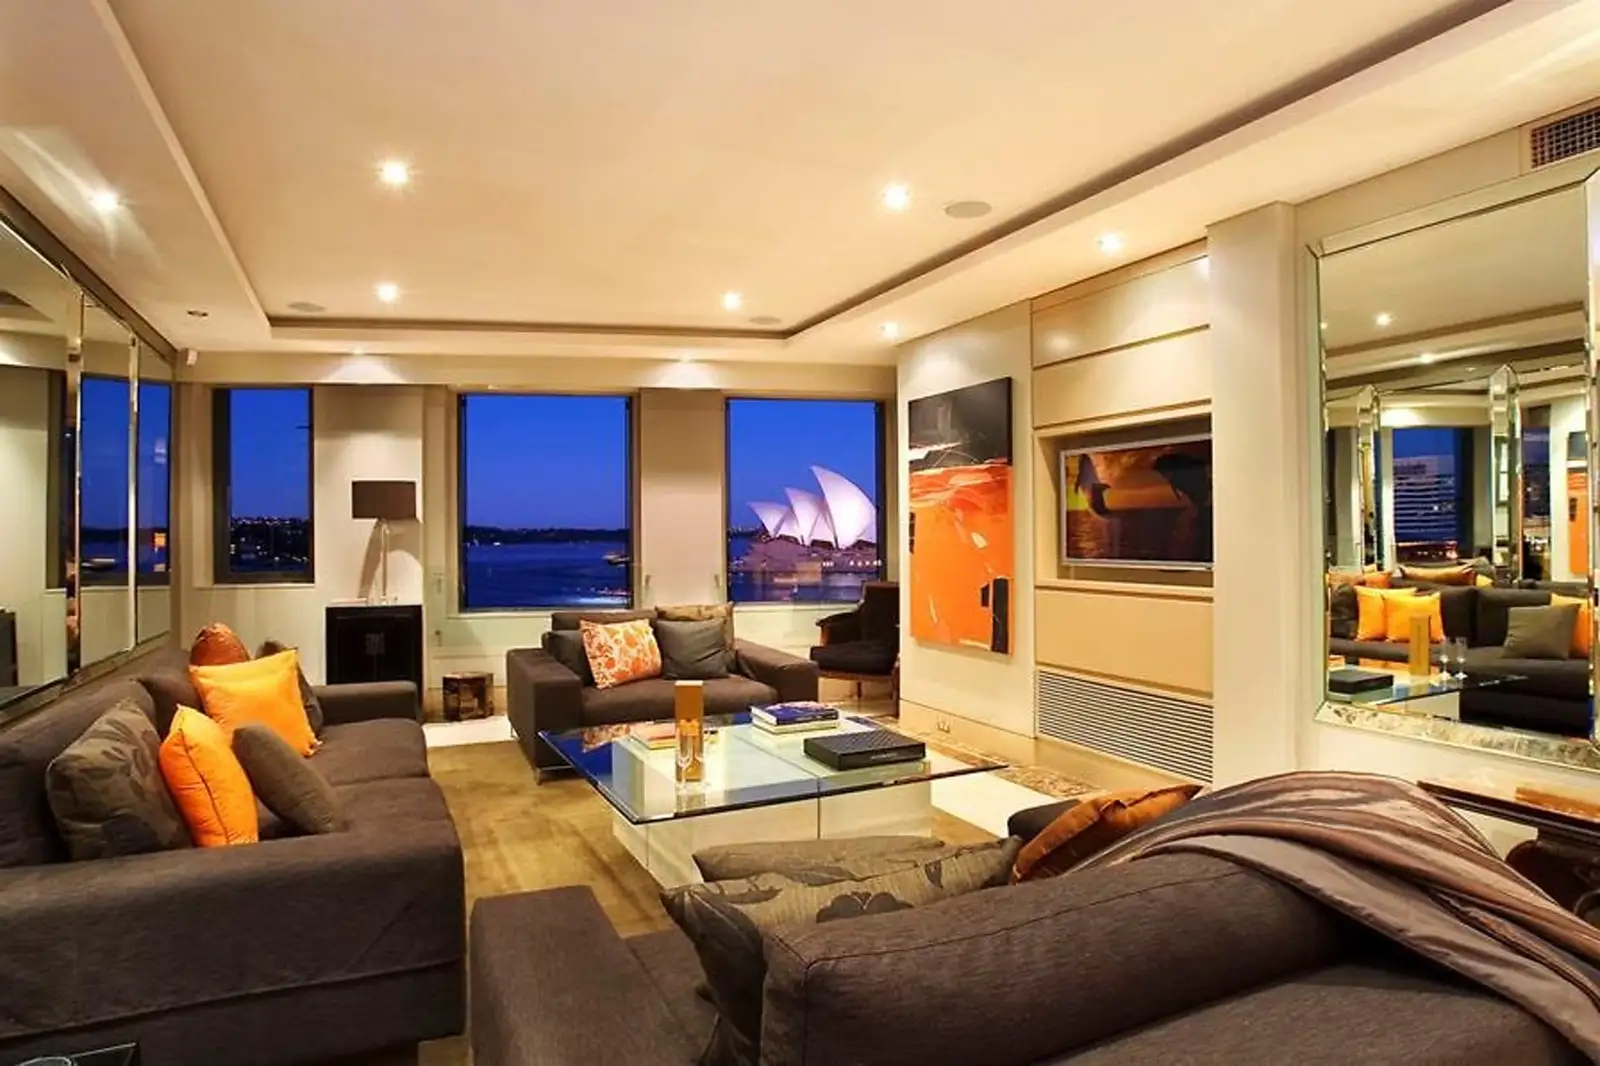 5/8 Hickson Road, The Rocks, Sydney Sold by Sydney Sotheby's International Realty - image 2